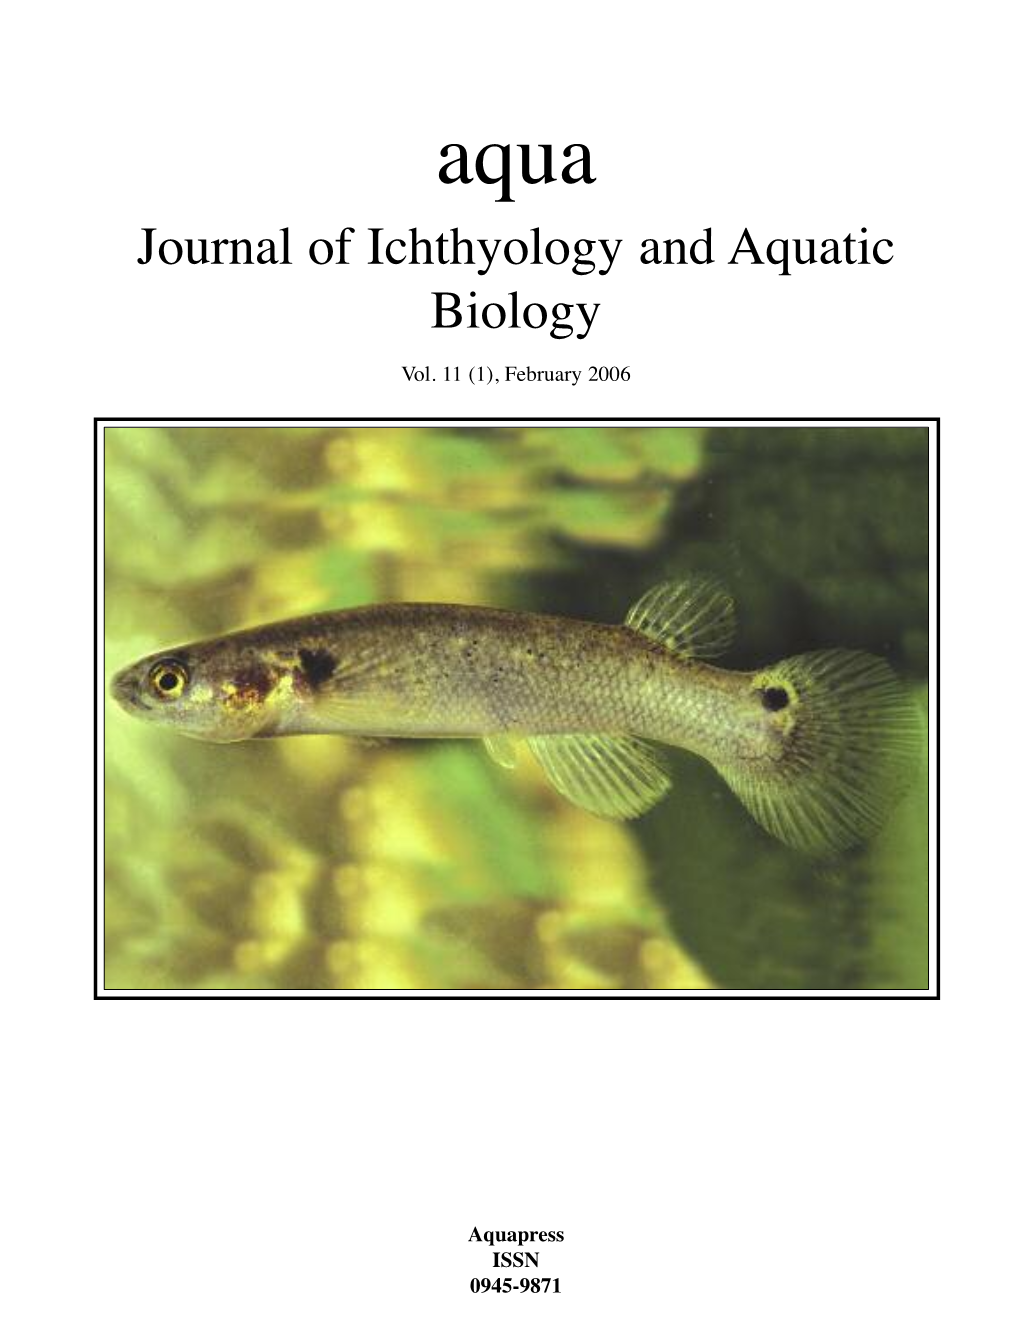 Journal of Ichthyology and Aquatic Biology Vol